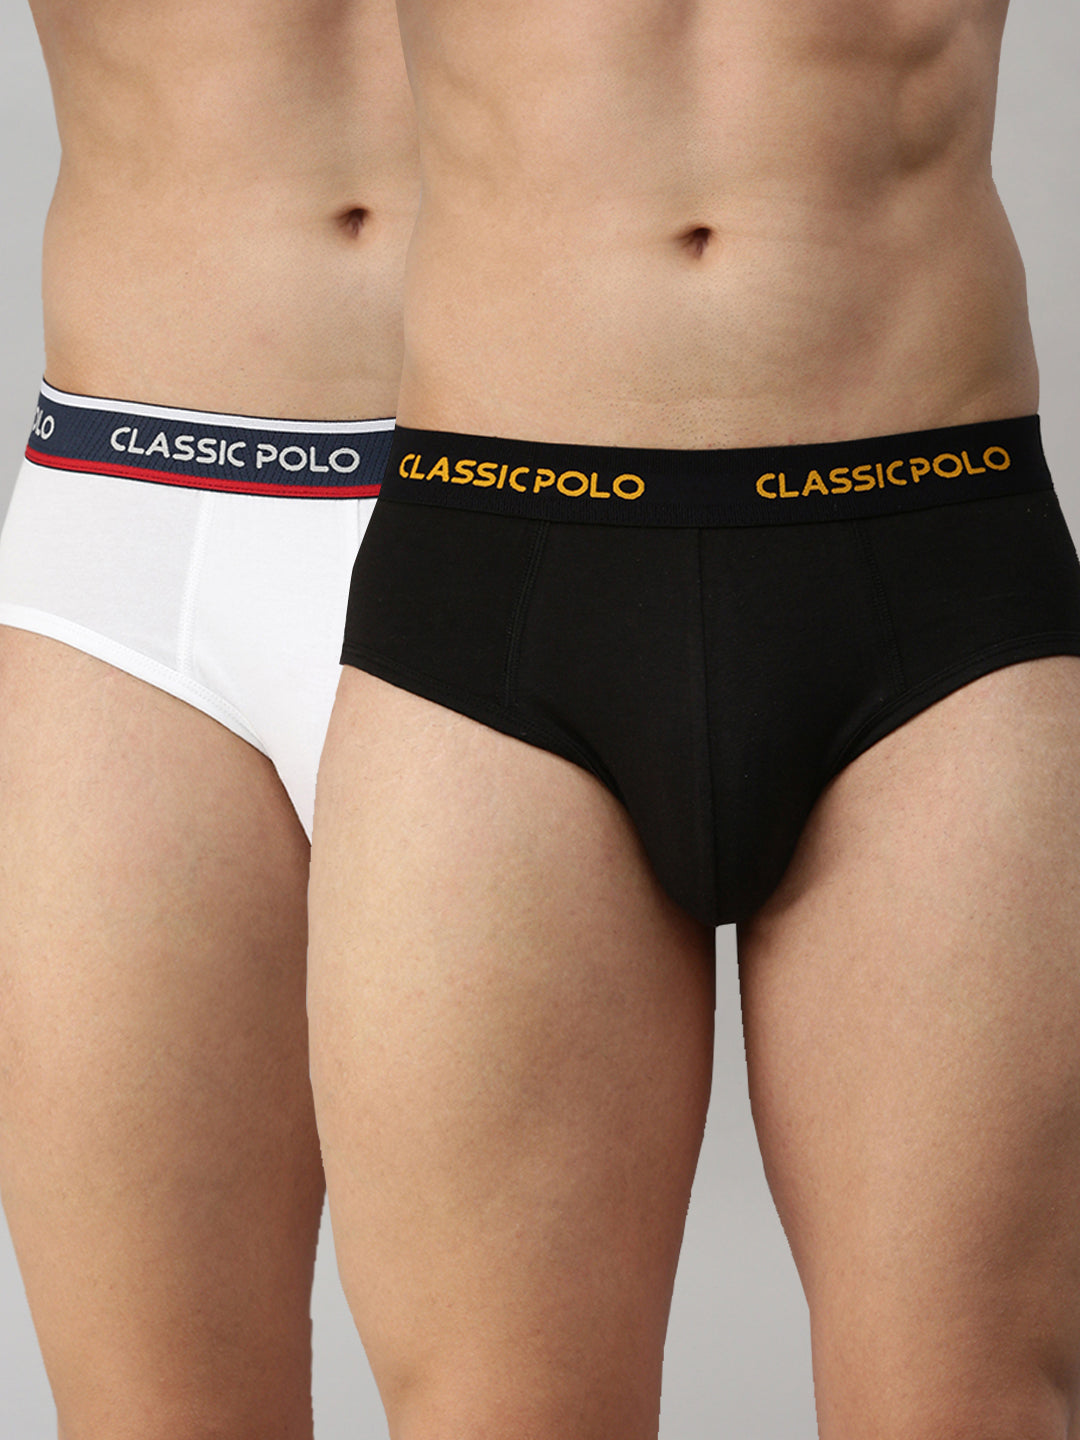 Classic Polo Men's Modal Solid Briefs | Scarce - White & Black (Pack of 2)